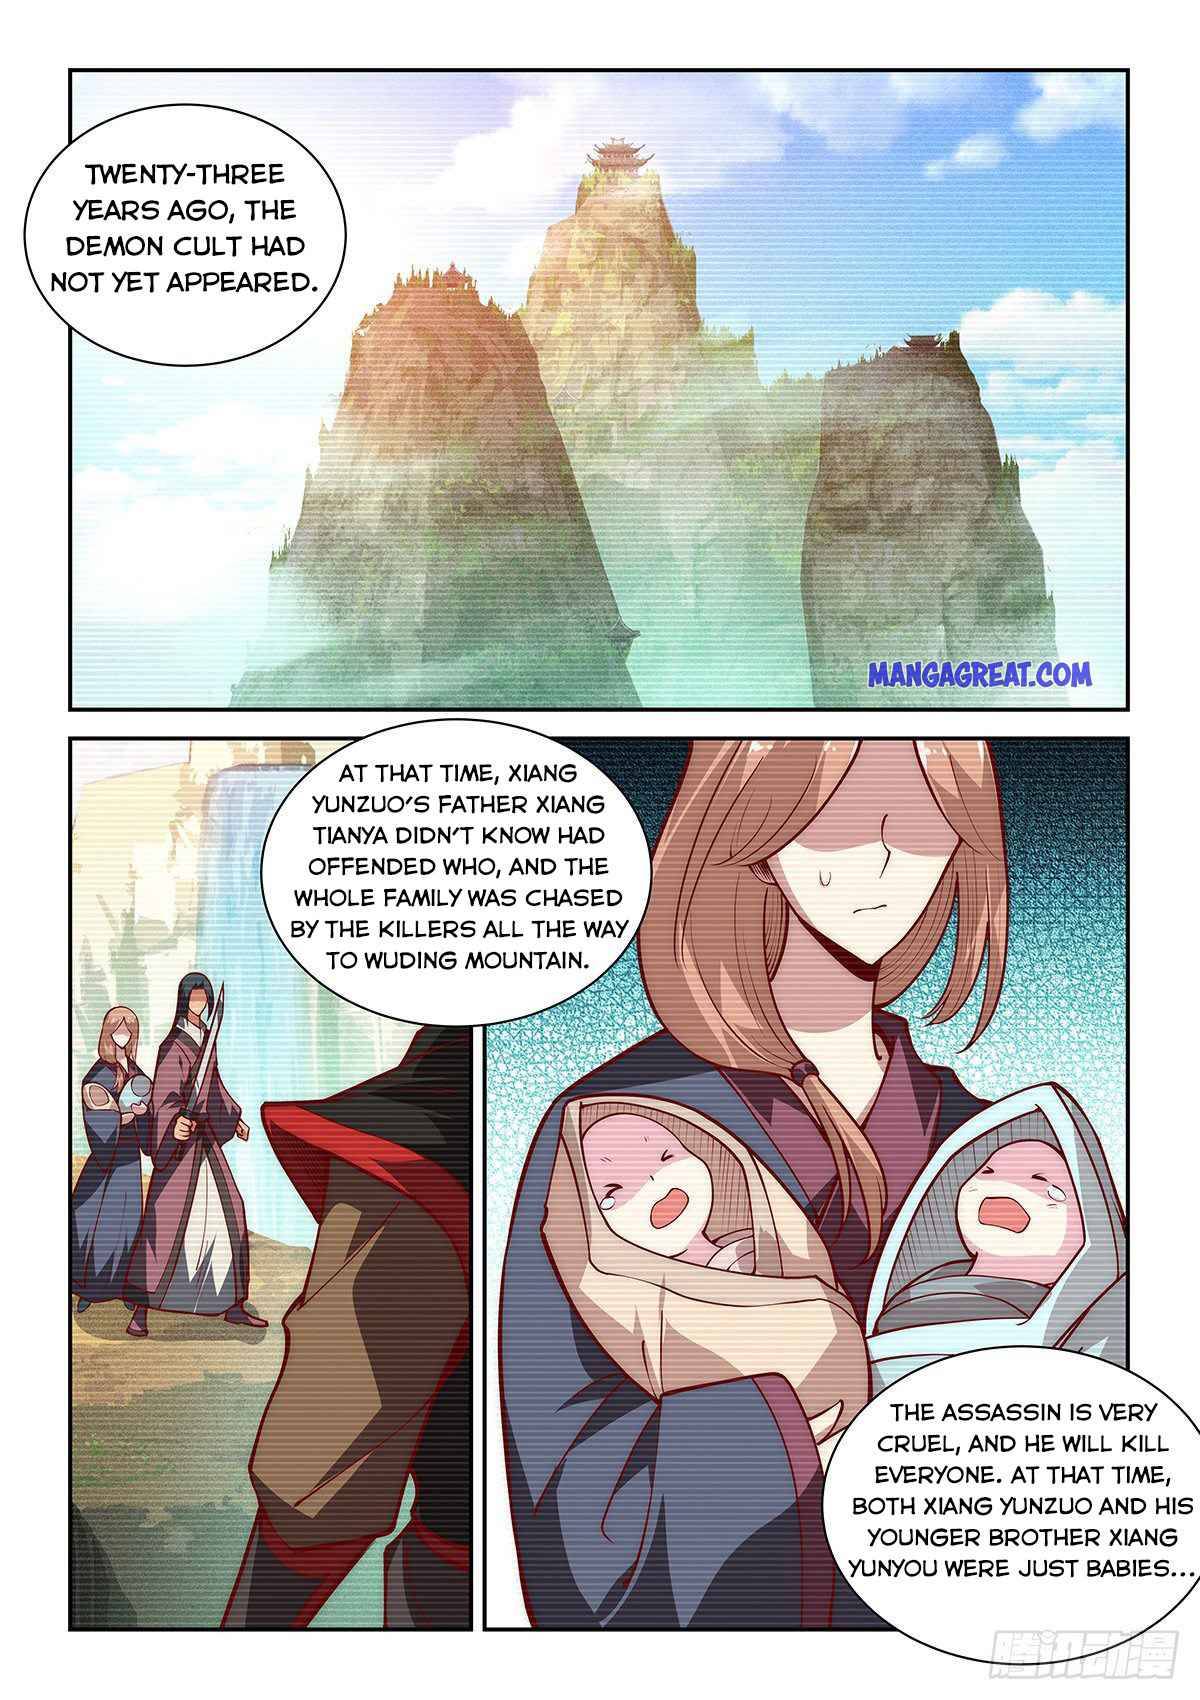 Pretend To Be Invincible In The World - Page 2